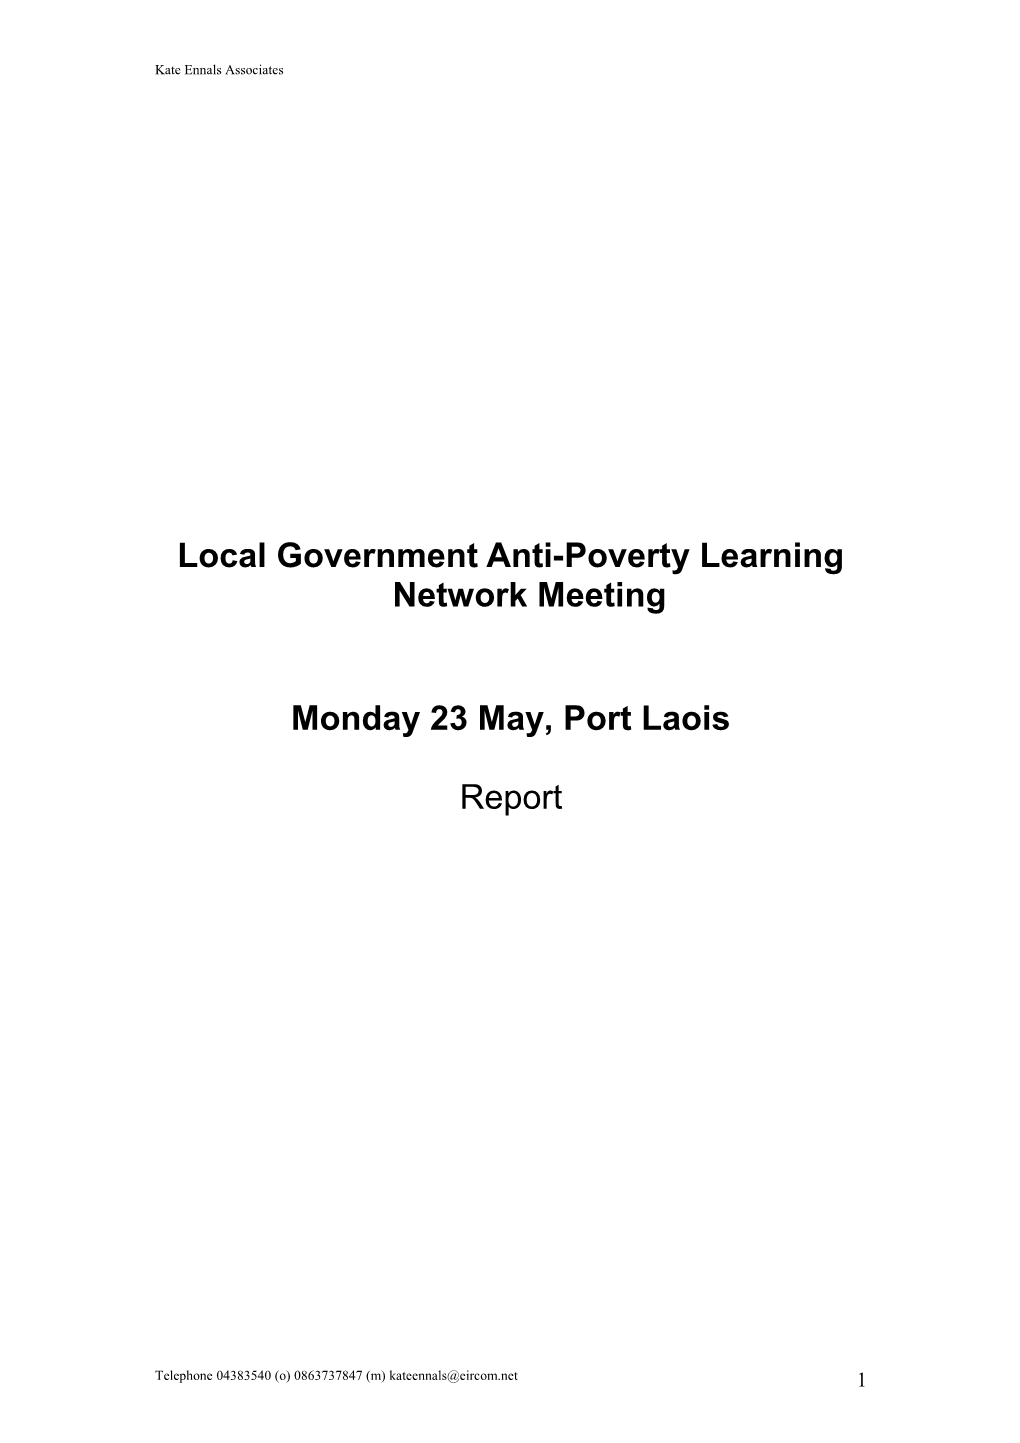 Local Government Anti-Poverty Learning Network Meeting